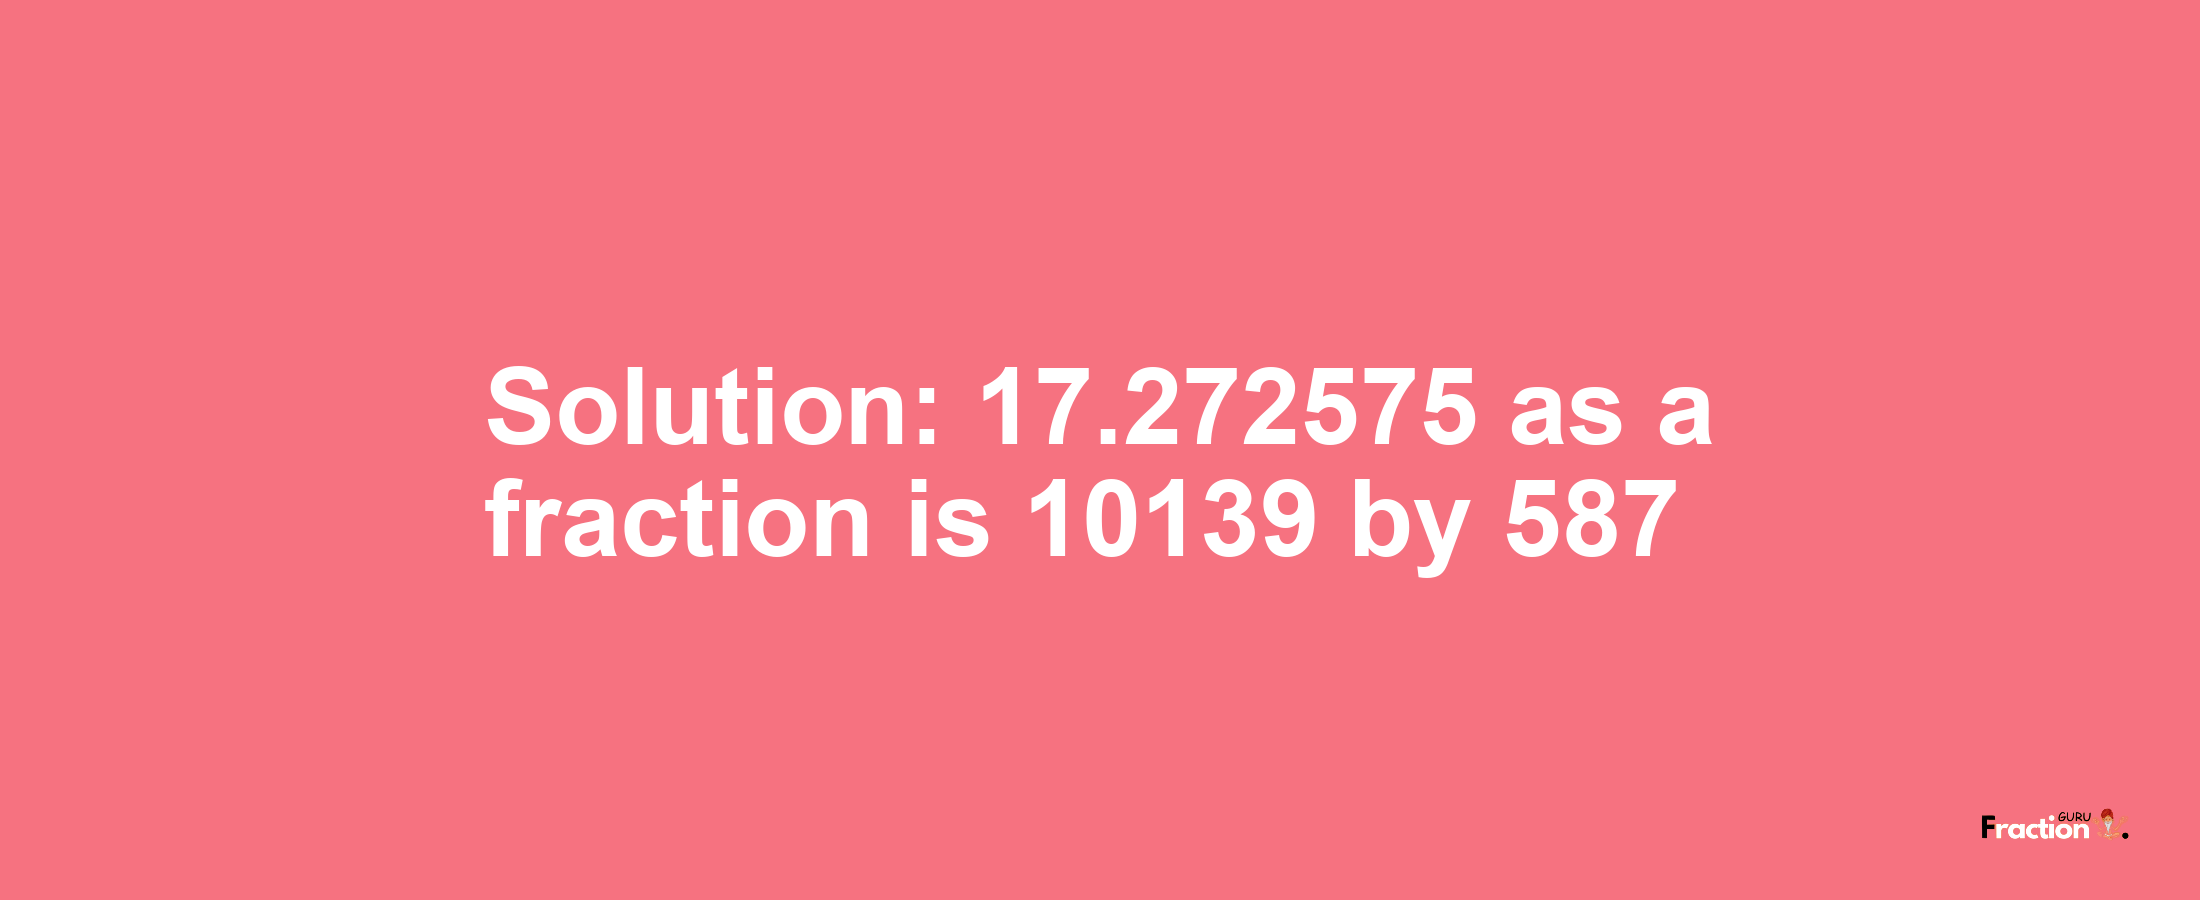 Solution:17.272575 as a fraction is 10139/587